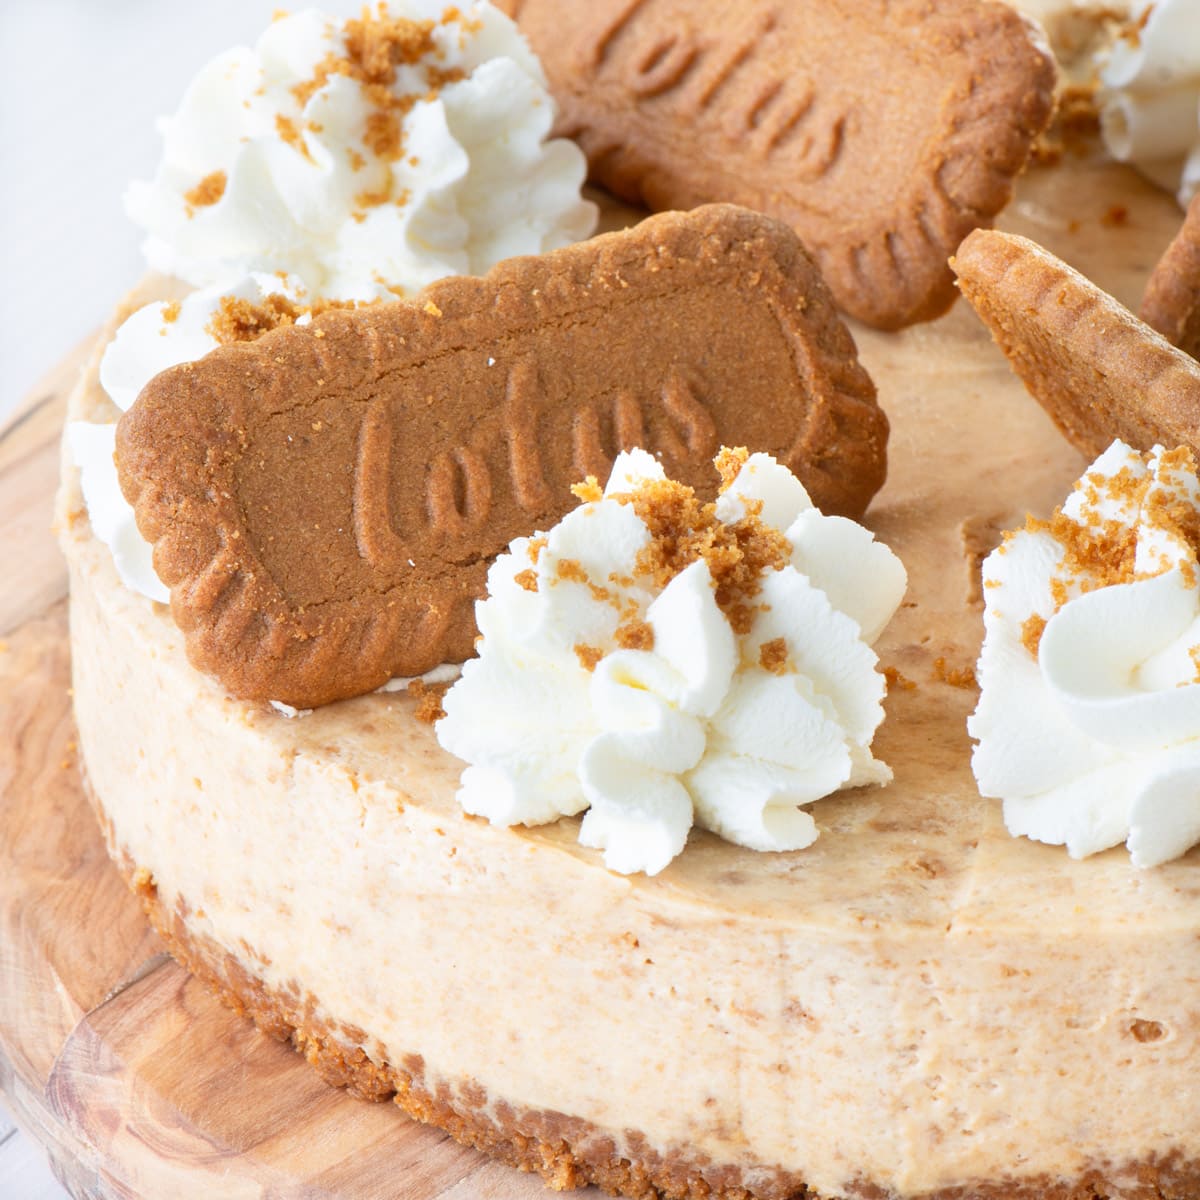 A Biscoff cheesecake on a wooden board.